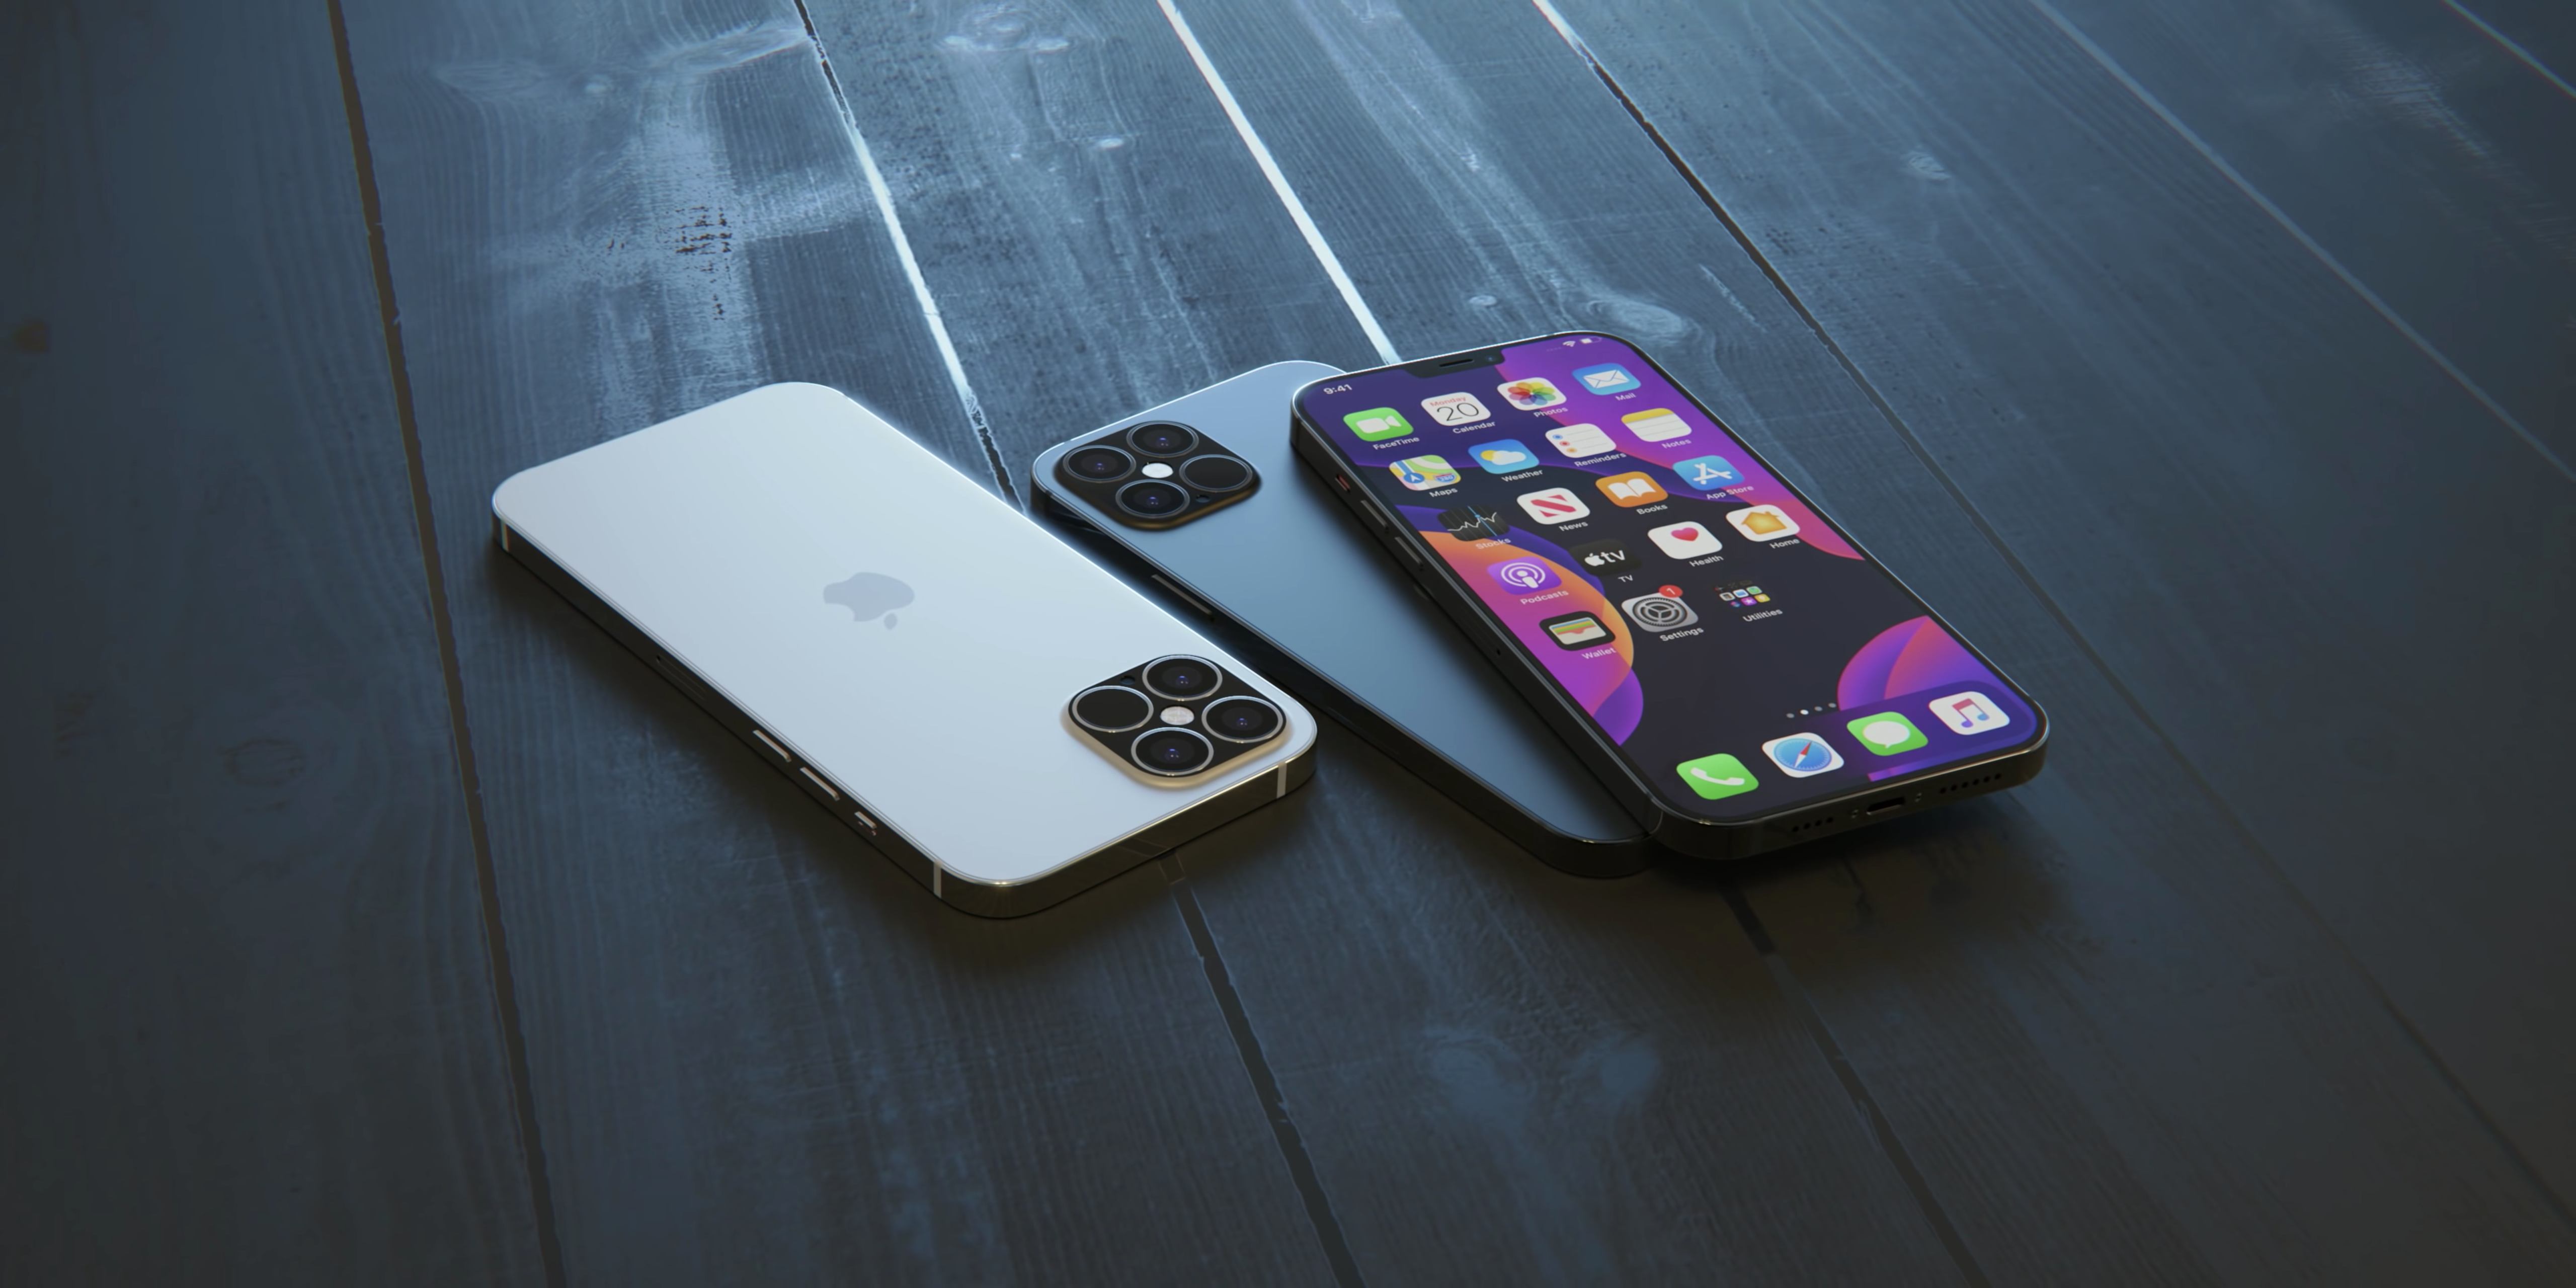 2020 iPhone 12 Pro rumours, leaks and predictions